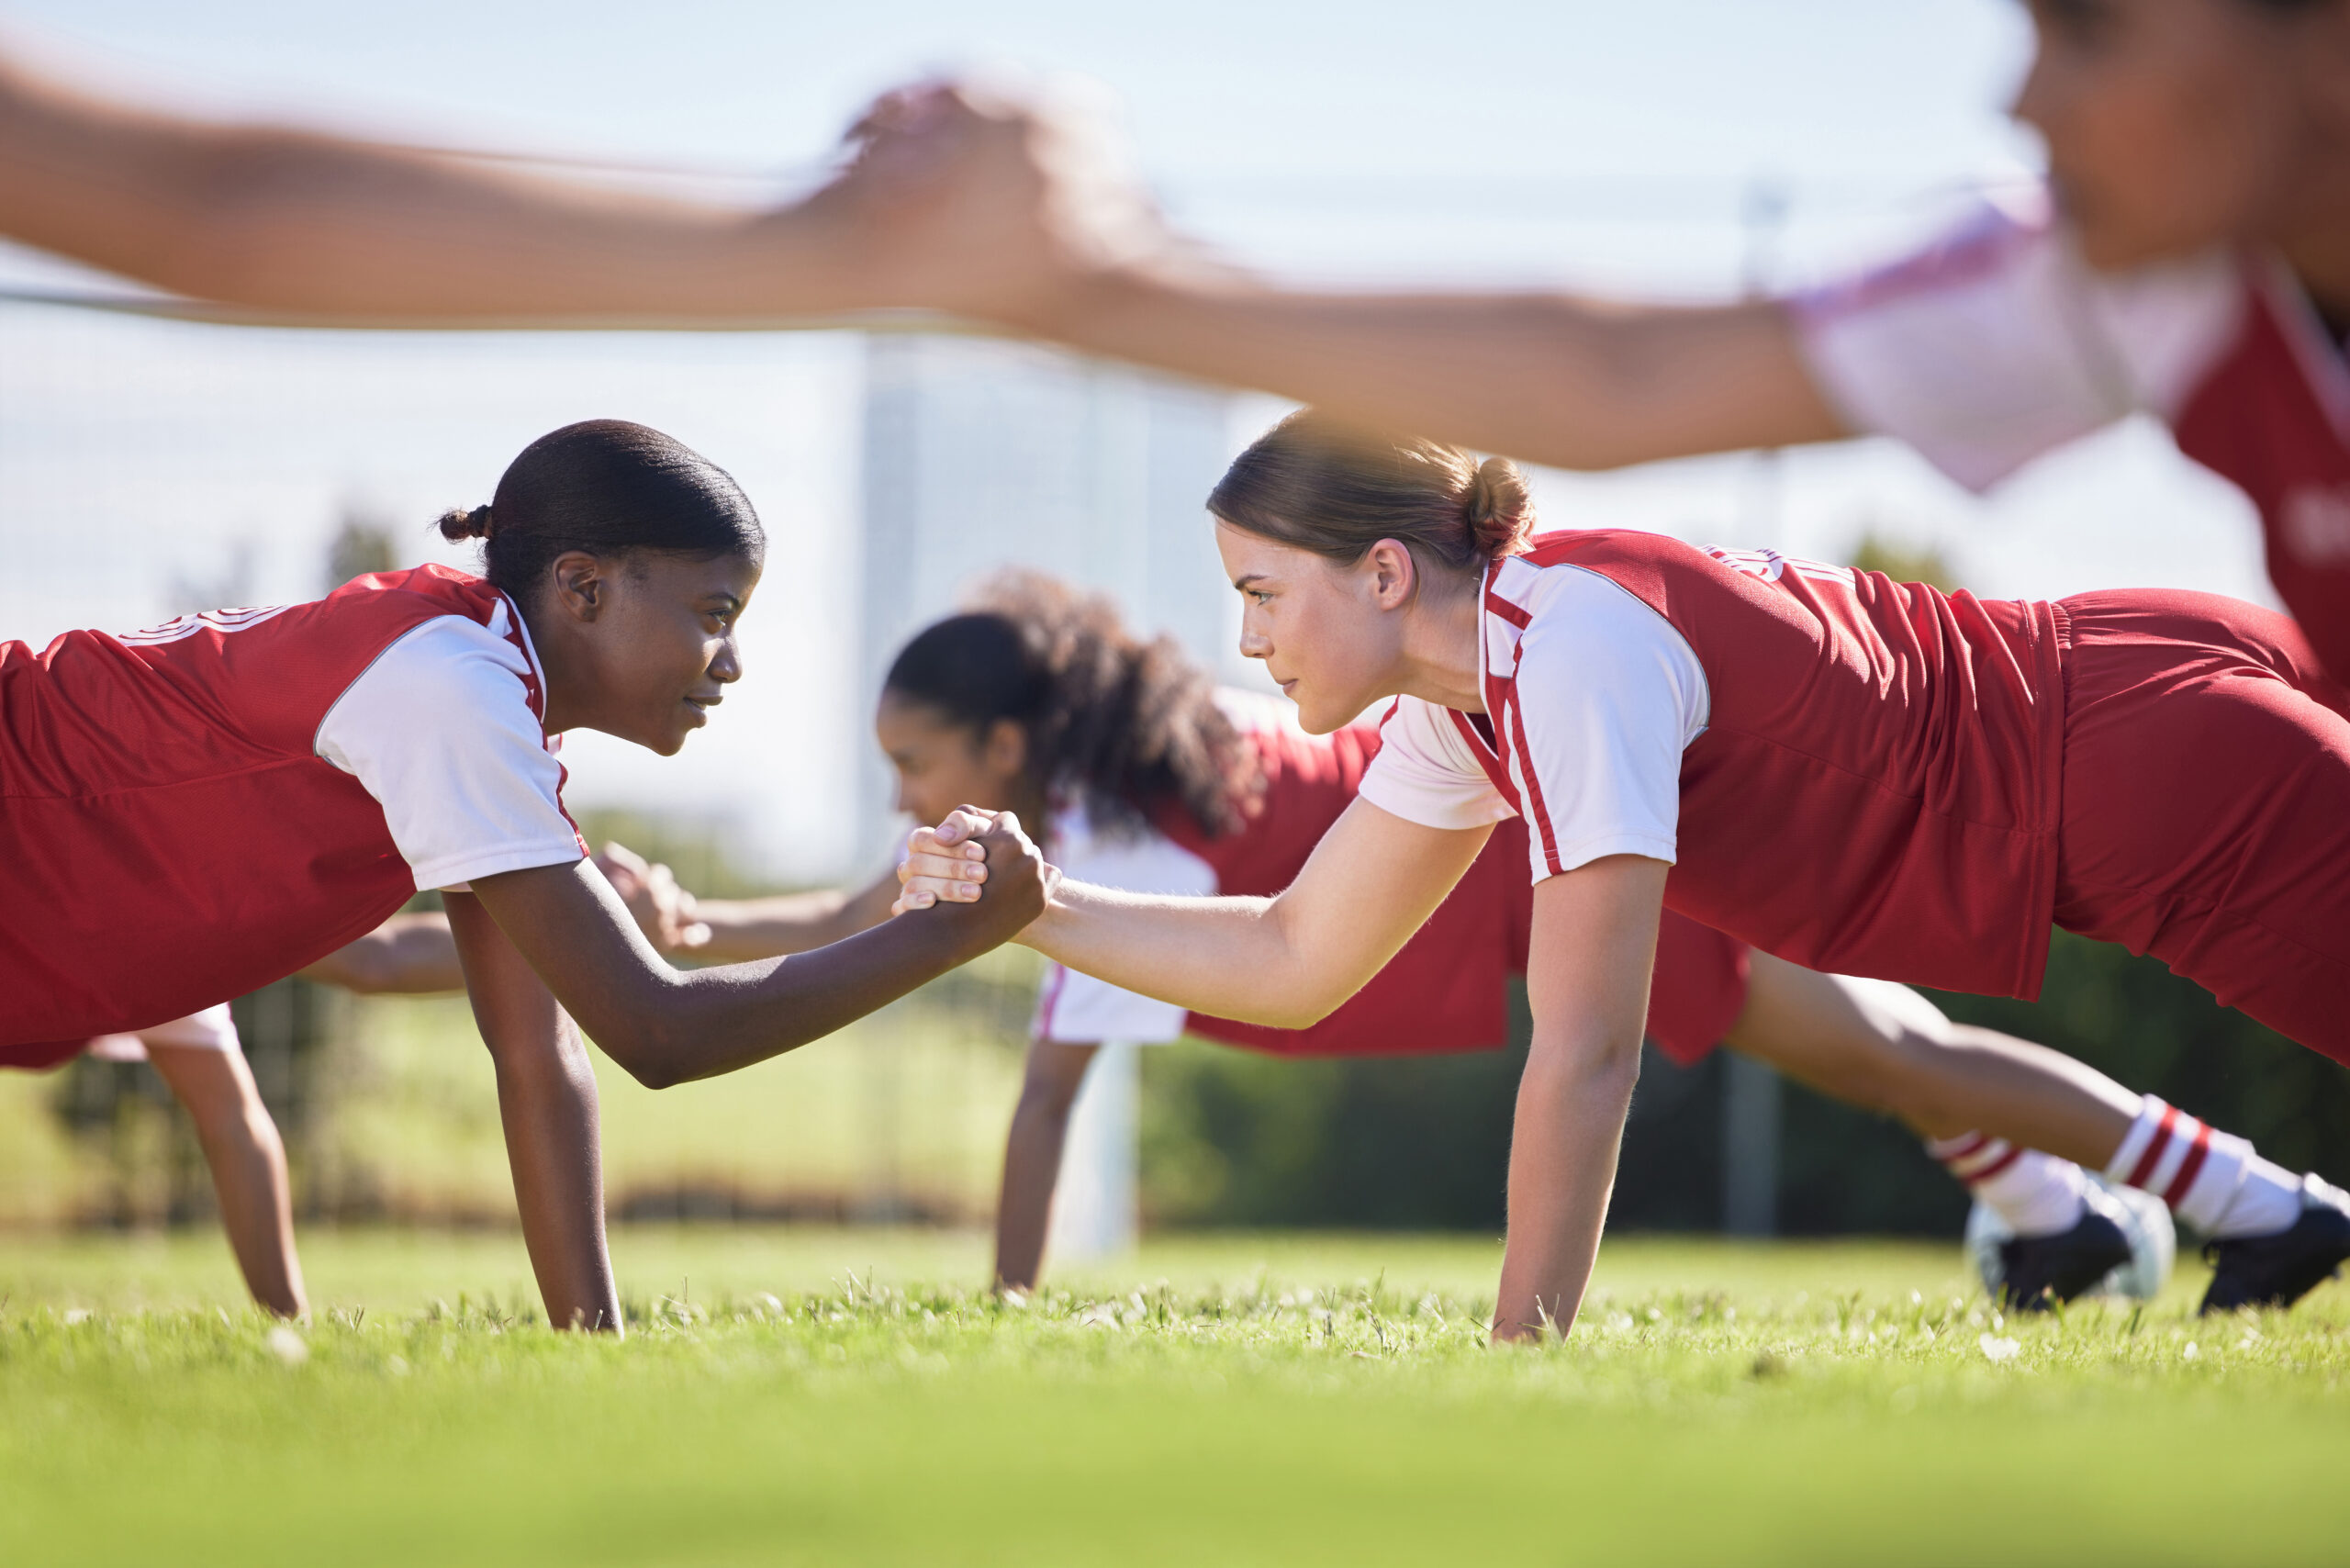 Women soccer, football or team sports holding hands in unity, support or motivation in routine work.